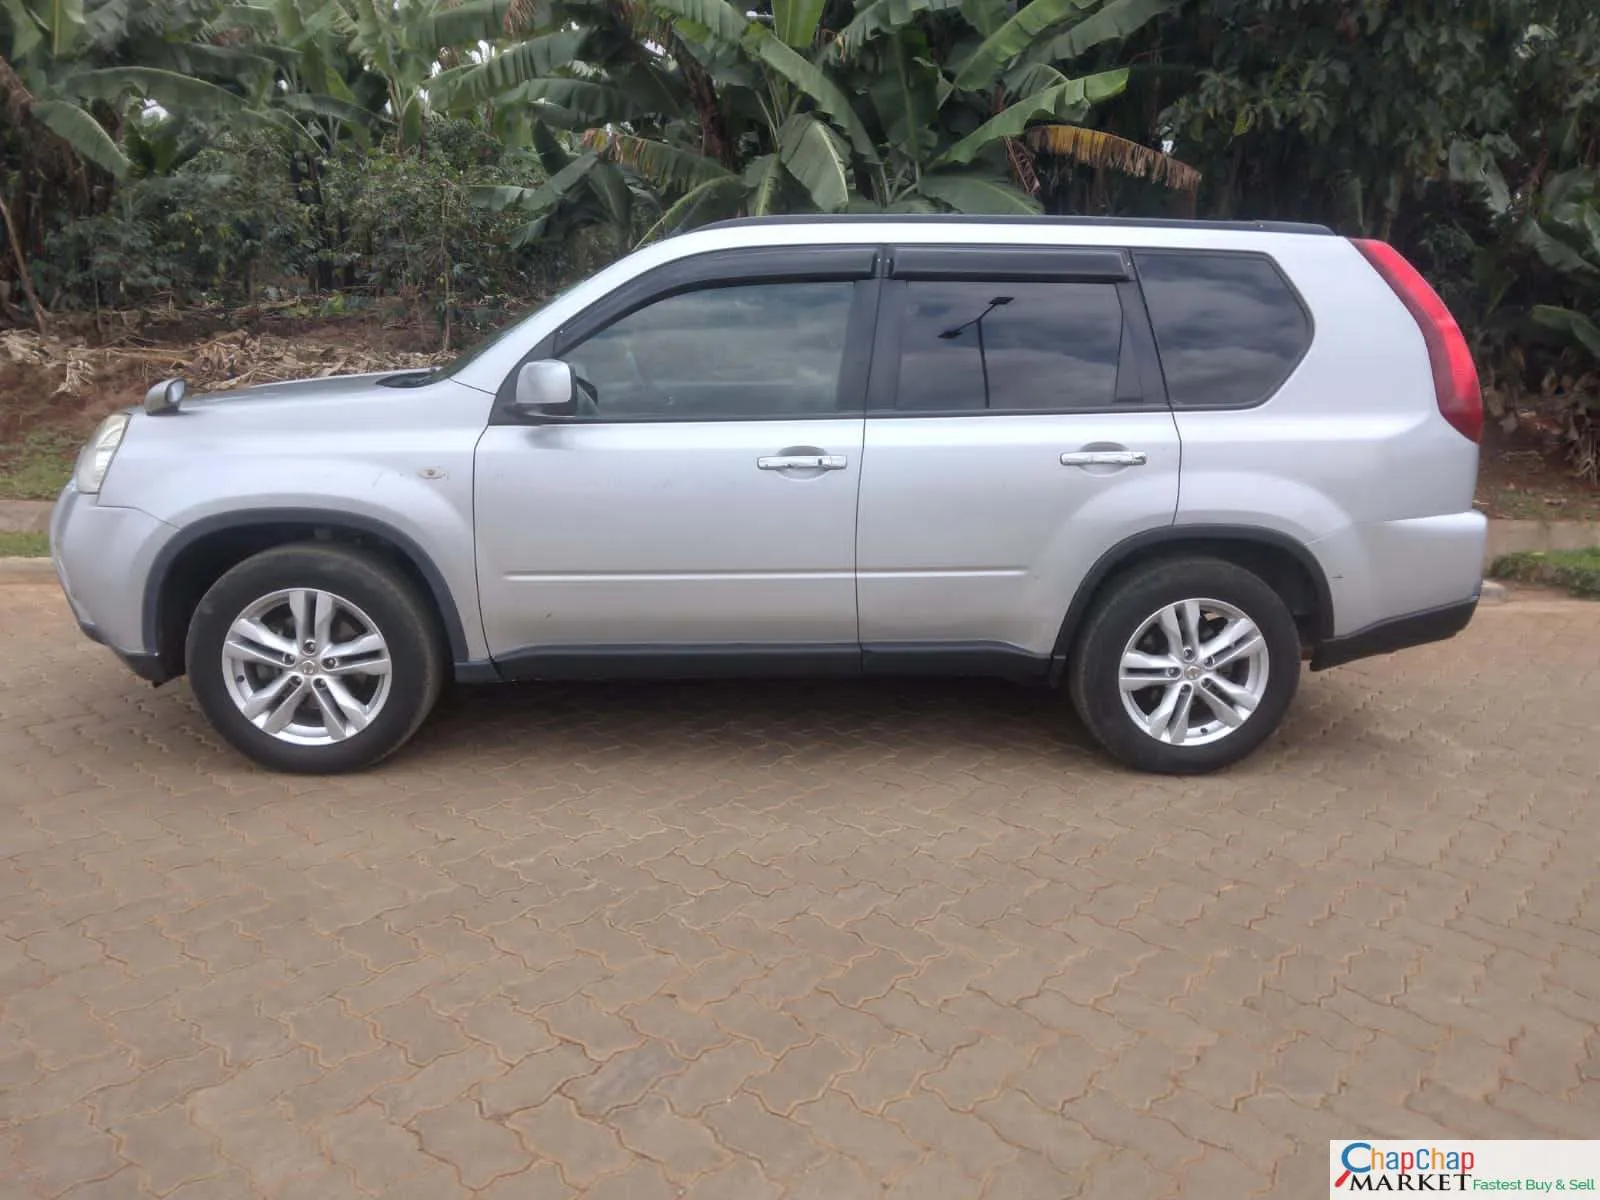 Nissan XTRAIL kenya KDN Quick sale You Pay 30% Deposit xtrail for sale in kenya hire purchase installments Trade in Ok Wow!